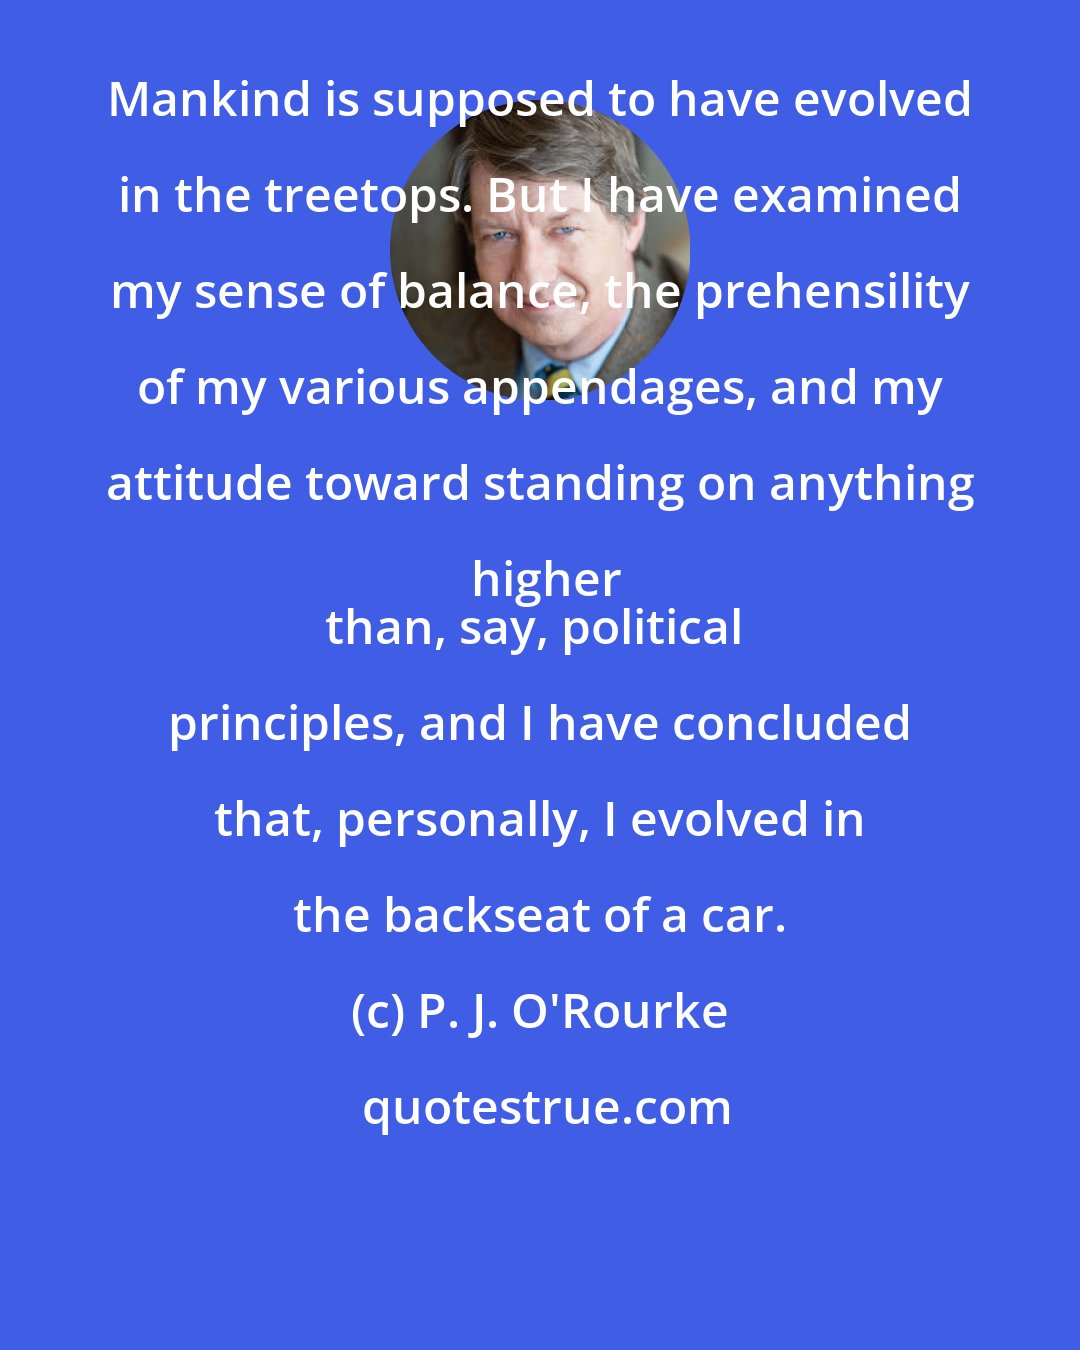 P. J. O'Rourke: Mankind is supposed to have evolved in the treetops. But I have examined my sense of balance, the prehensility of my various appendages, and my attitude toward standing on anything higher
than, say, political principles, and I have concluded that, personally, I evolved in the backseat of a car.